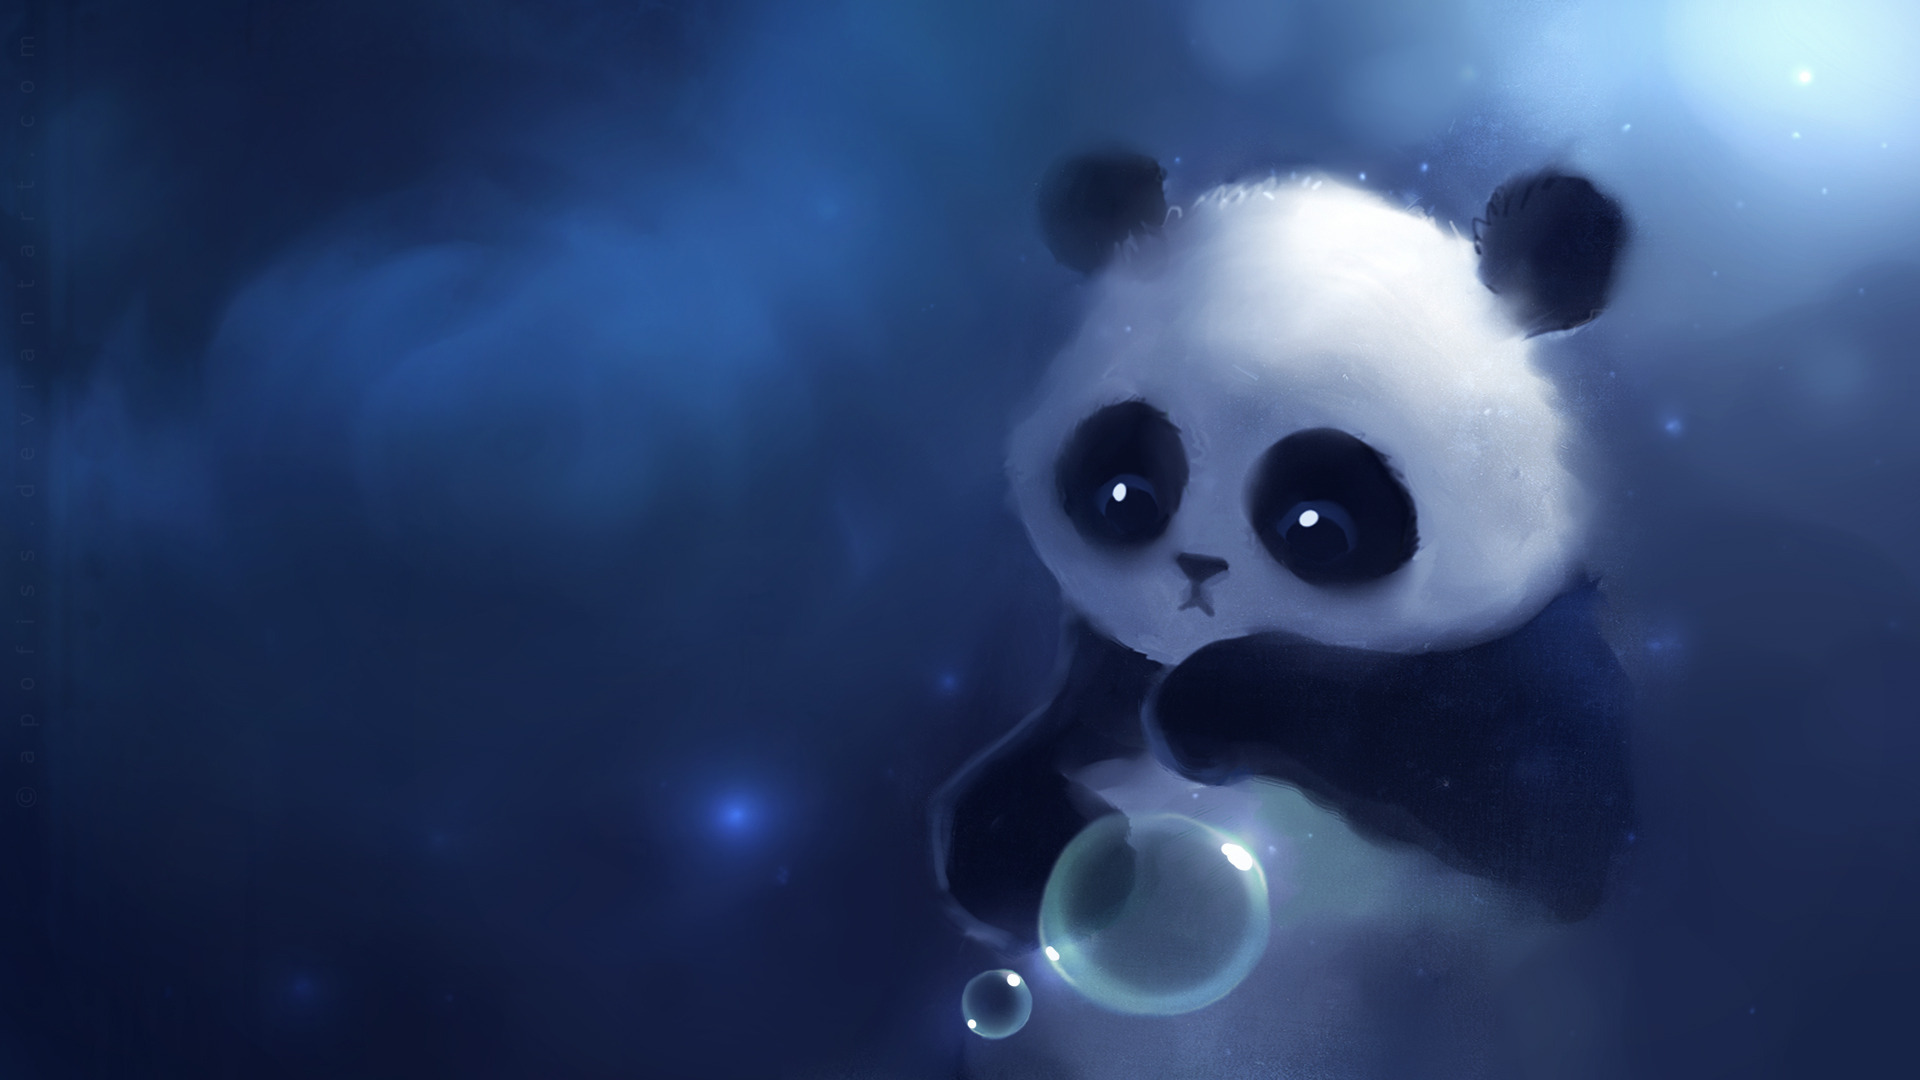 Cute Panda Painting Wallpaper Share This On